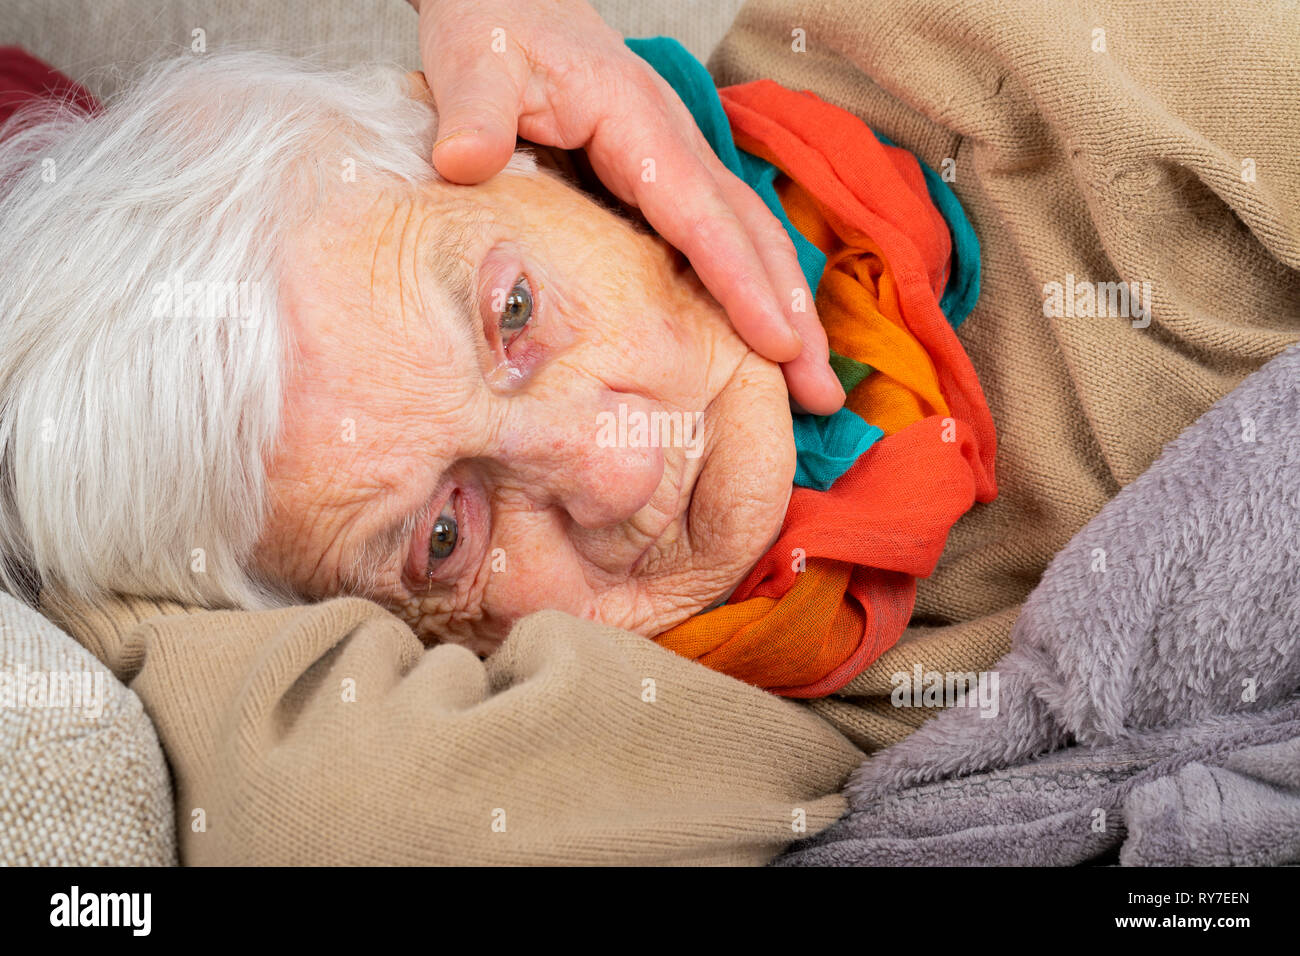 Close up portrait of a sad elderly wrinkled woman lying on the couch, wearing colorful scarf - caregiver's hand touching her face Stock Photo